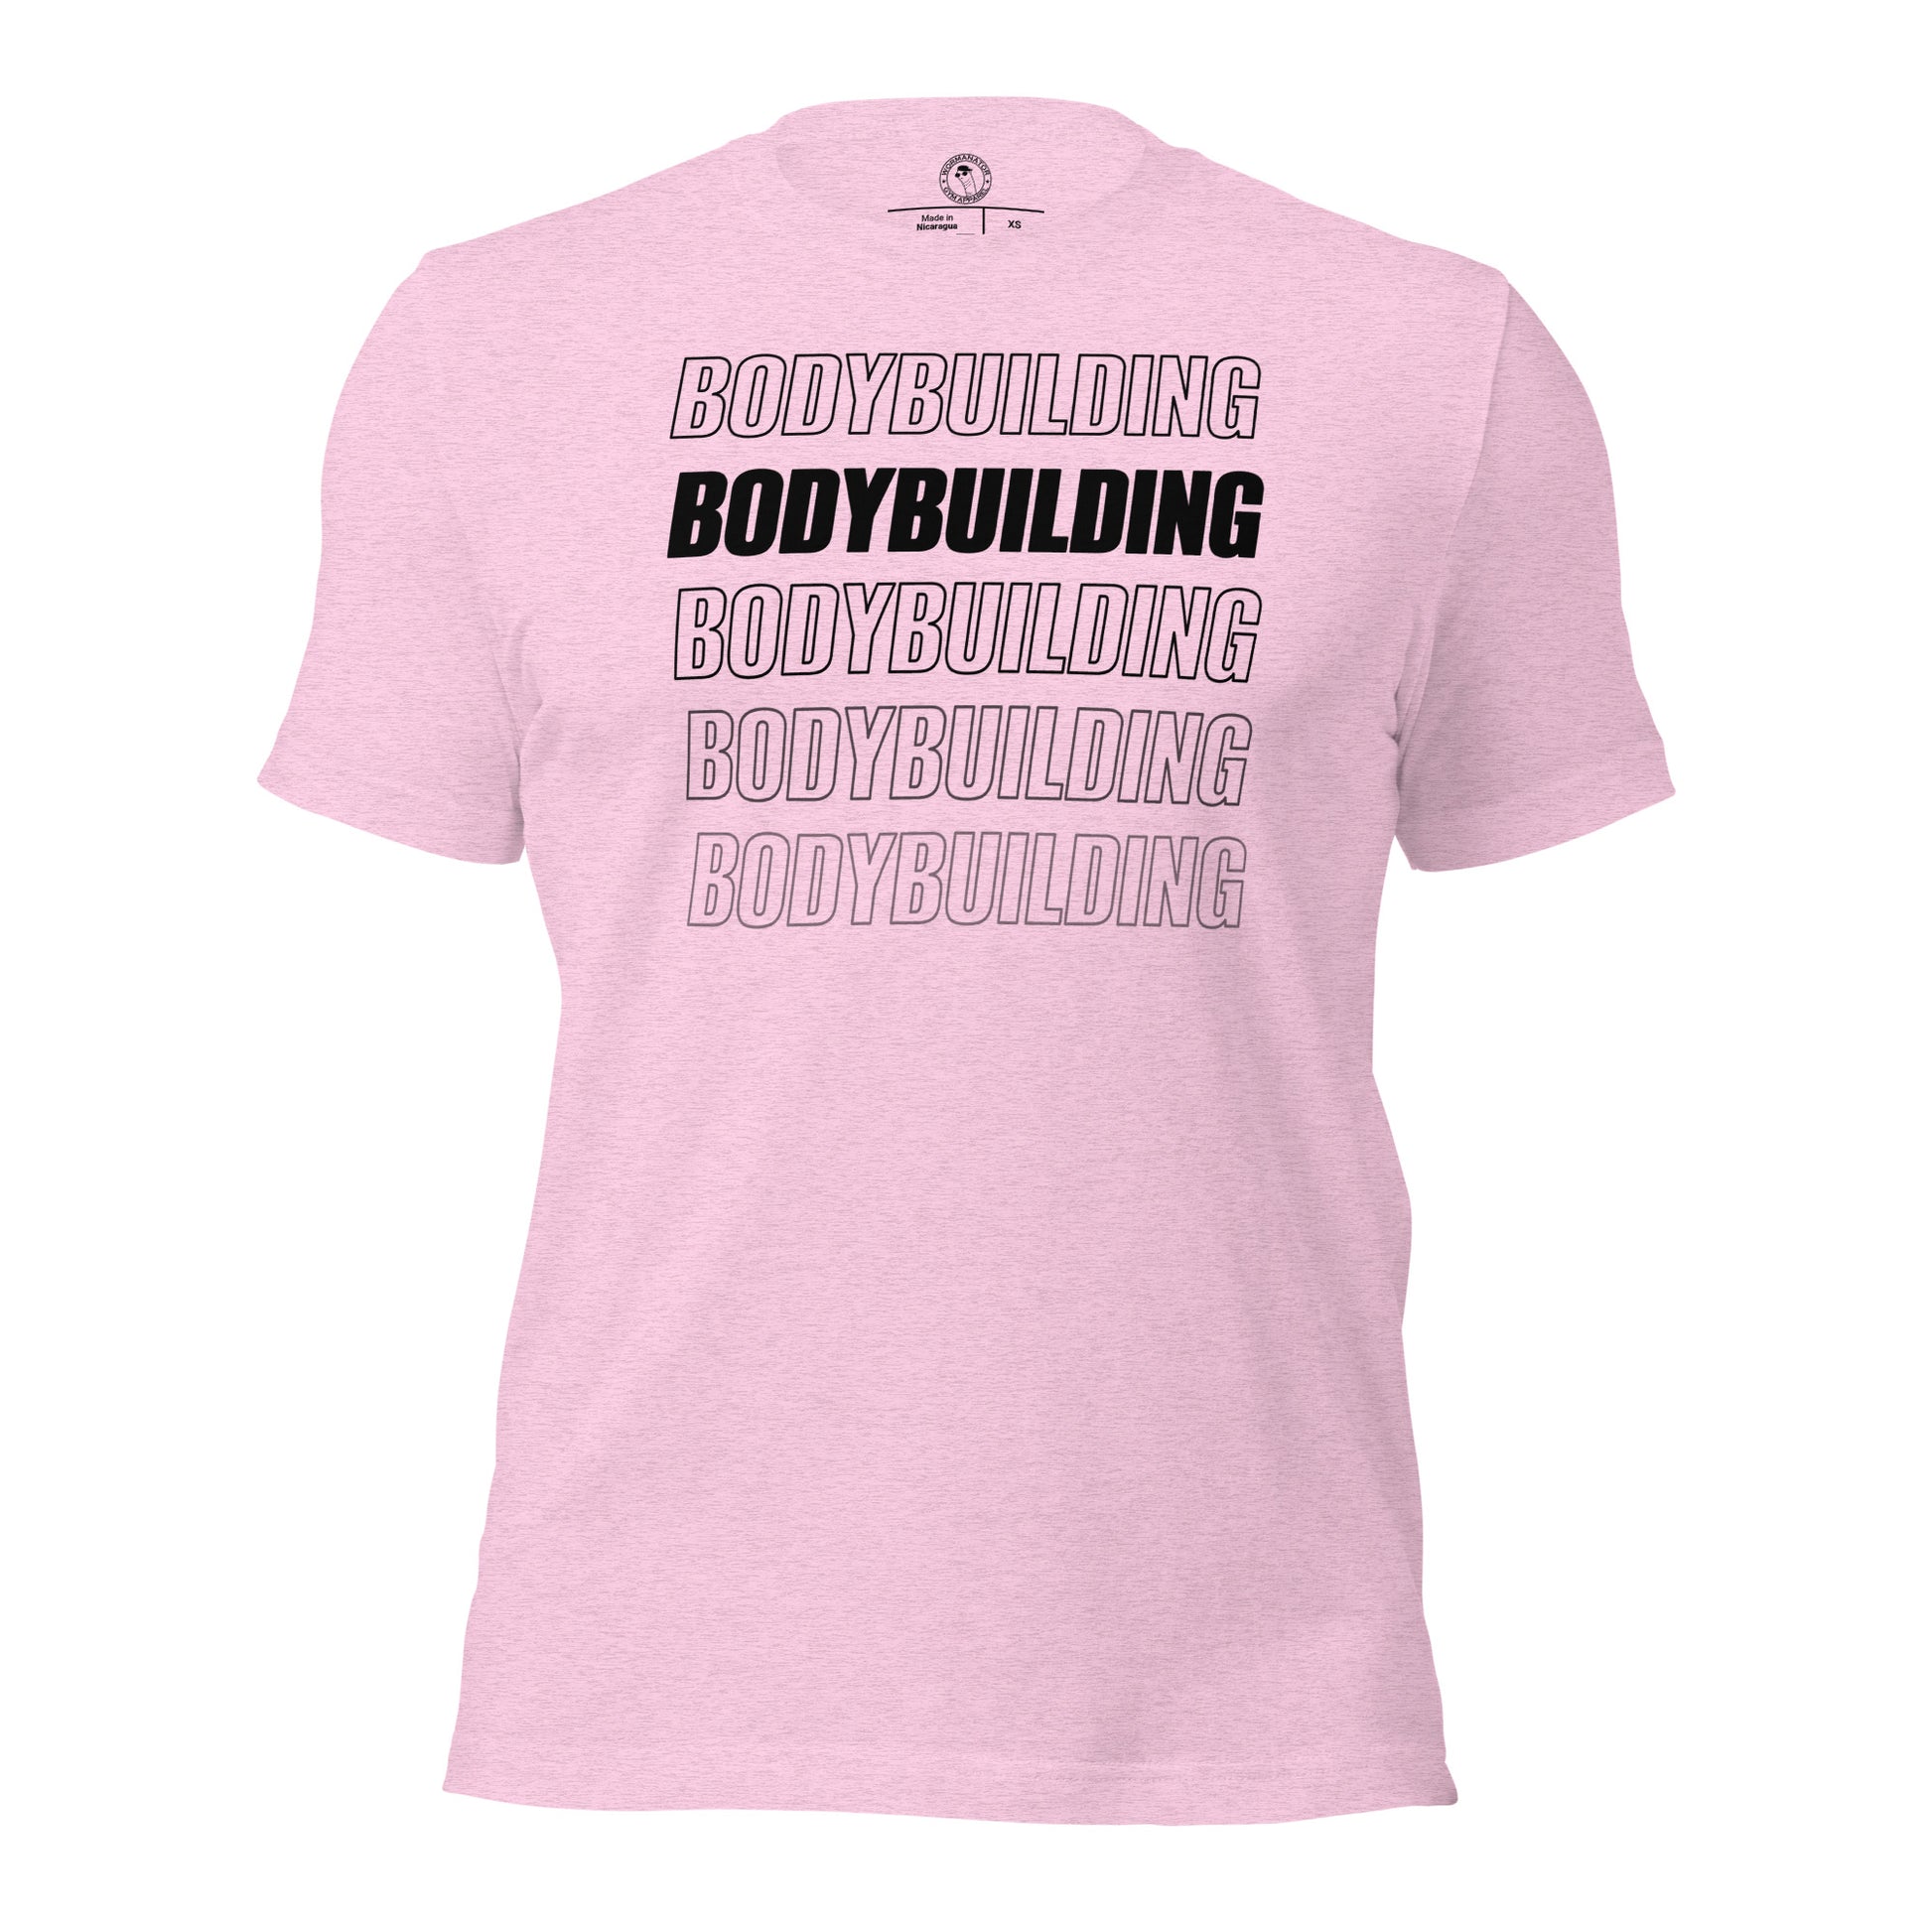 Bodybuilding Shirt in Heather Prism Lilac